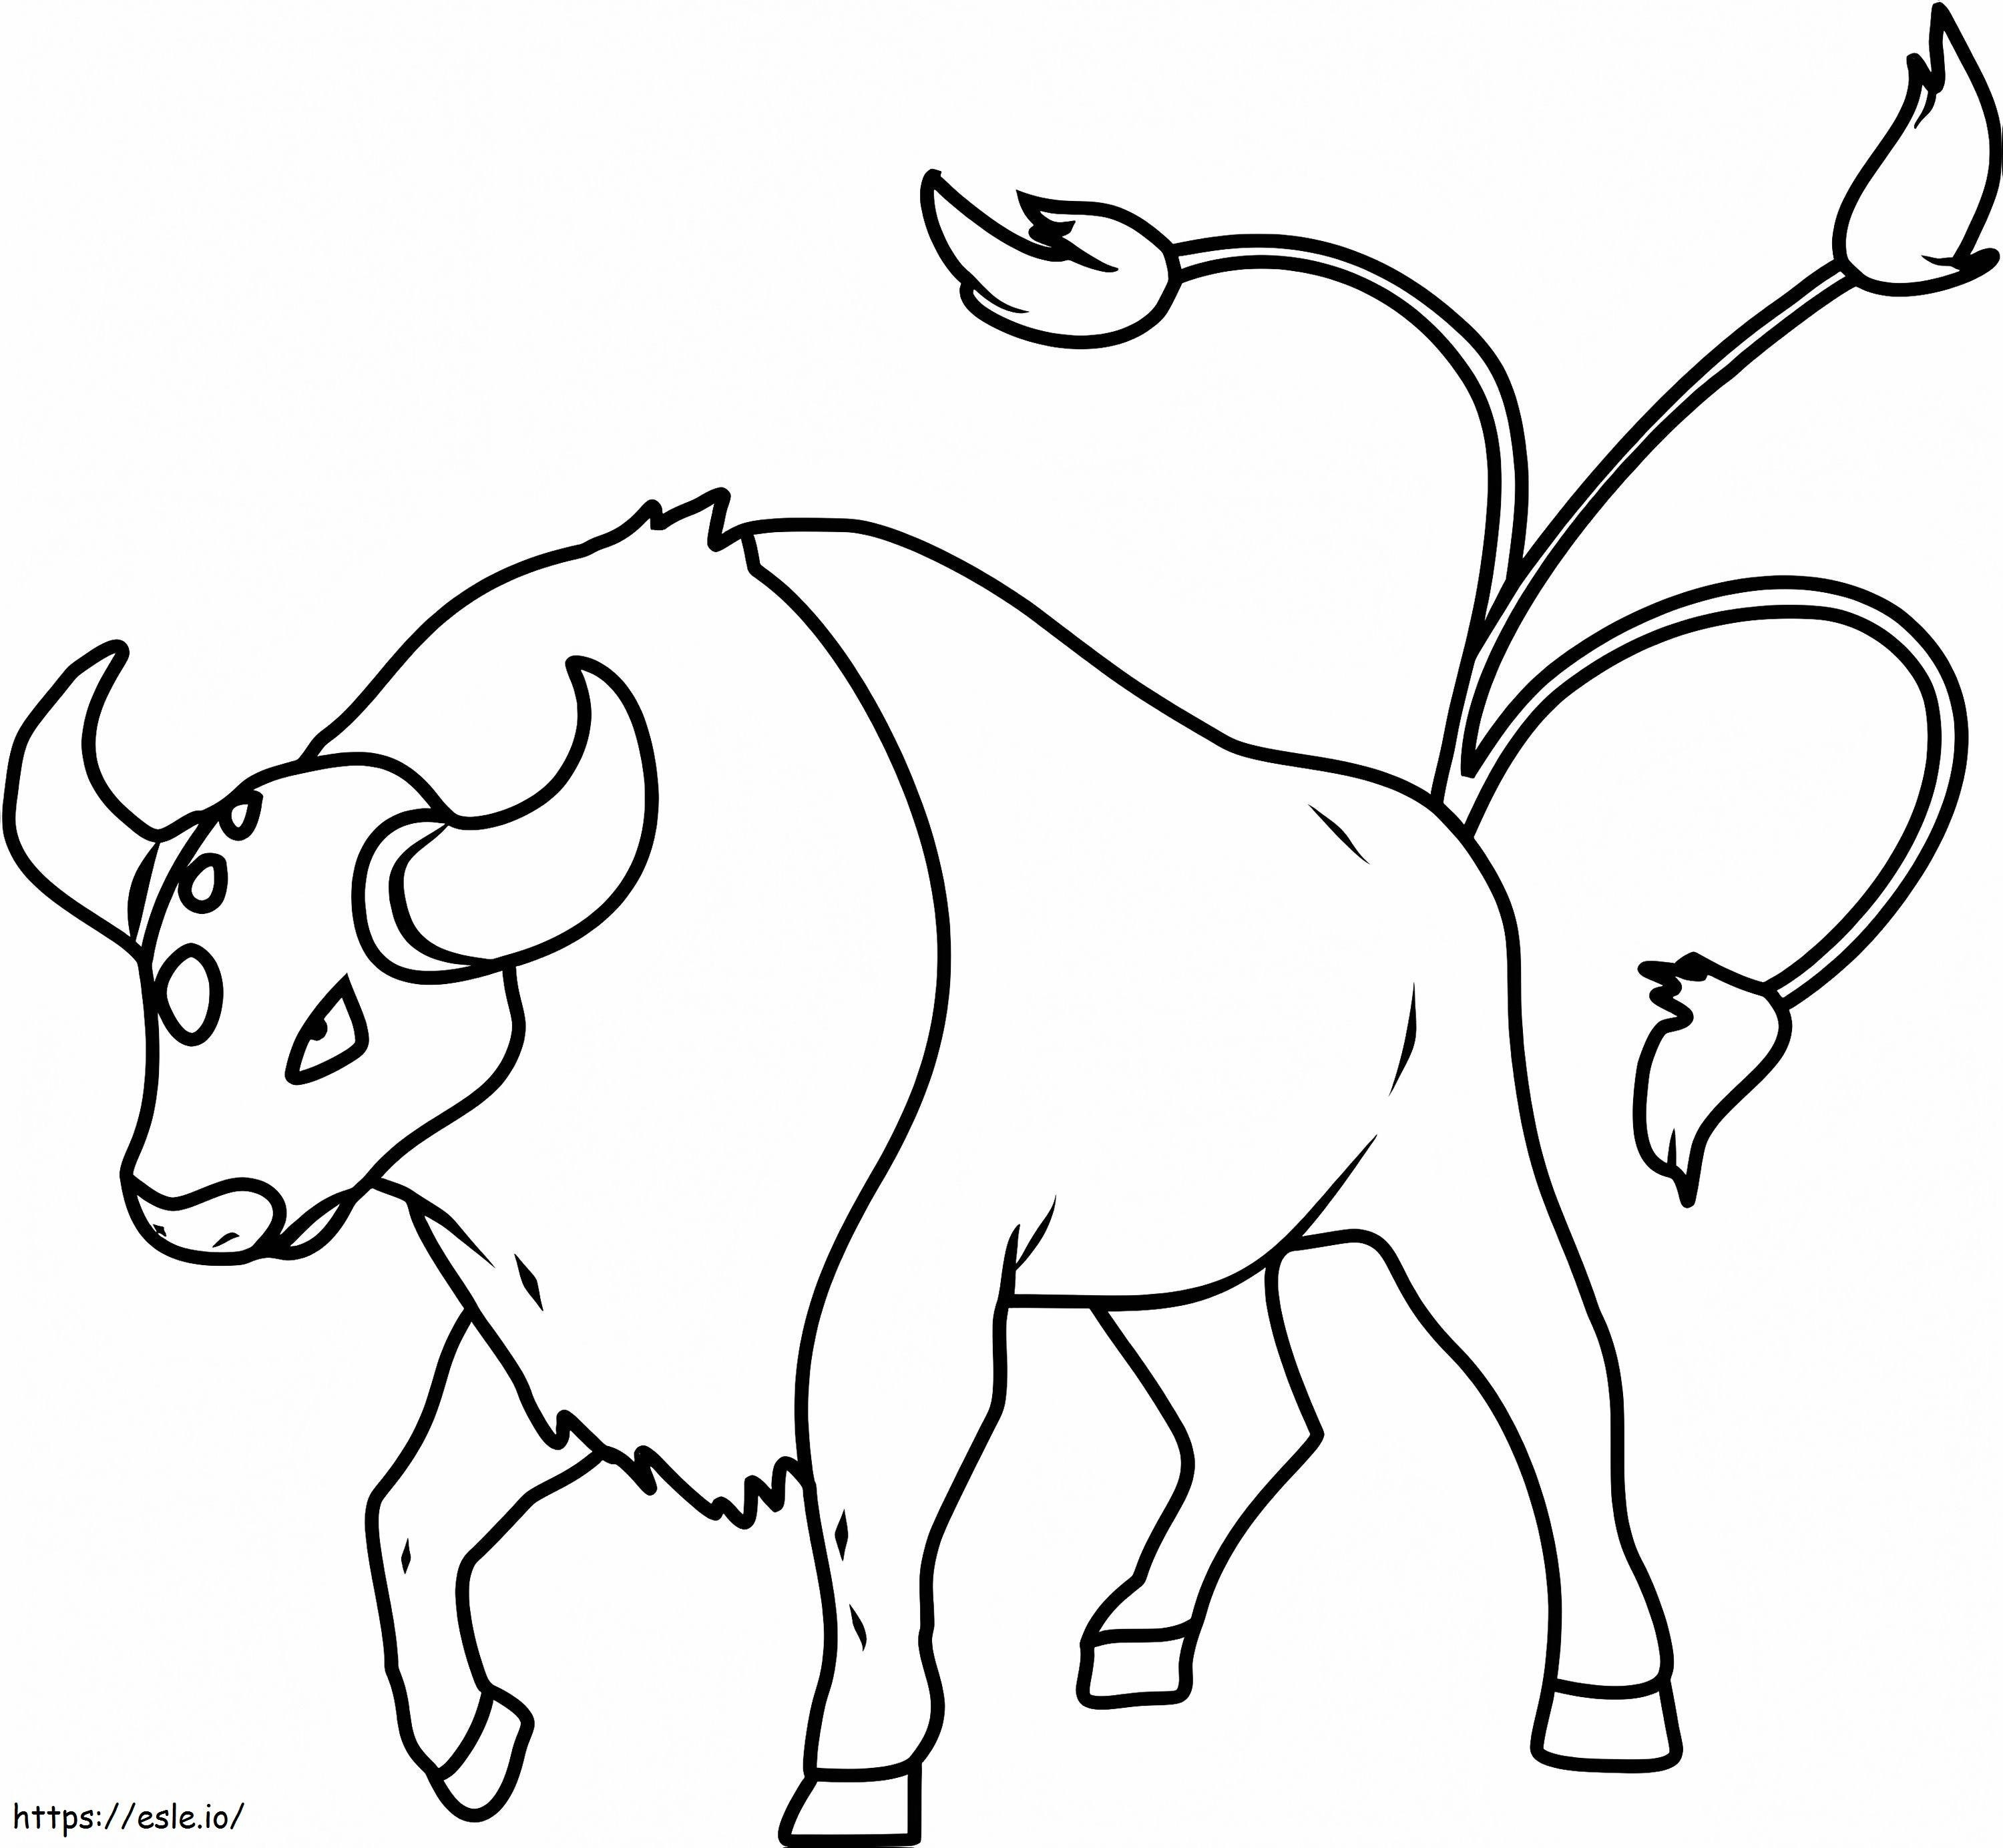 Bulls 2 coloring page